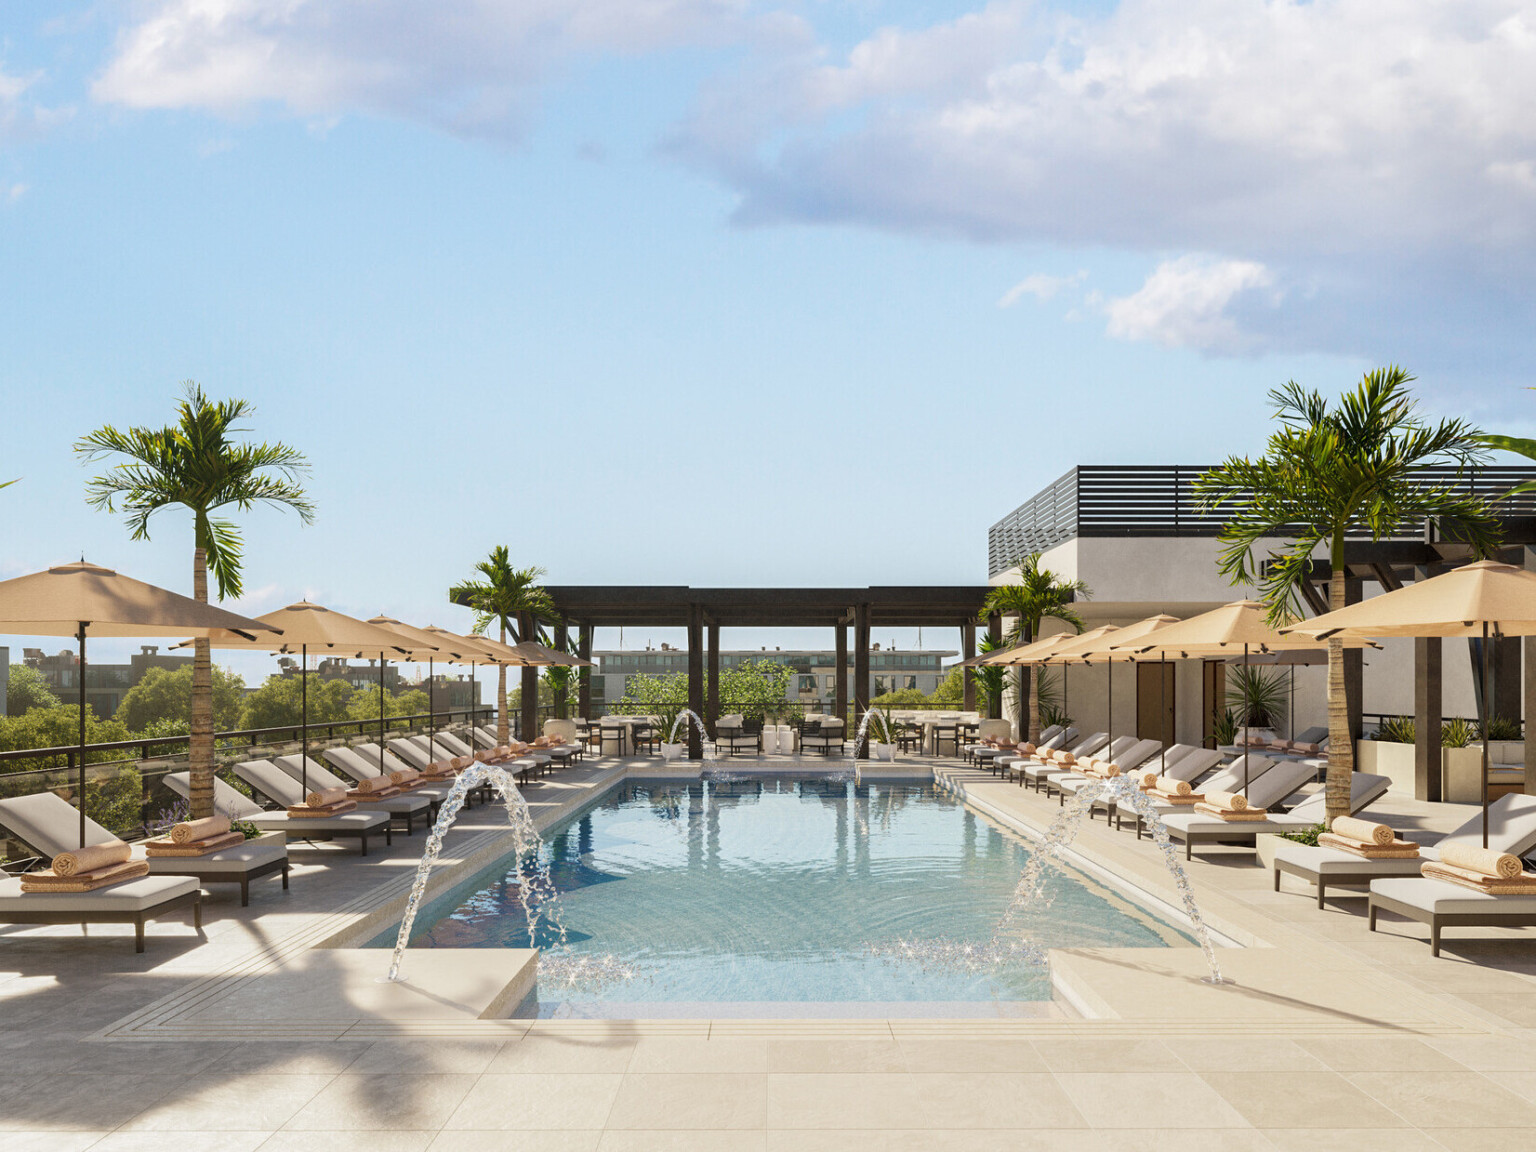 Rectangular swimming pool lined with lounge chairs with tan cushion, tan umbrellas, looking at a dark wood pergola